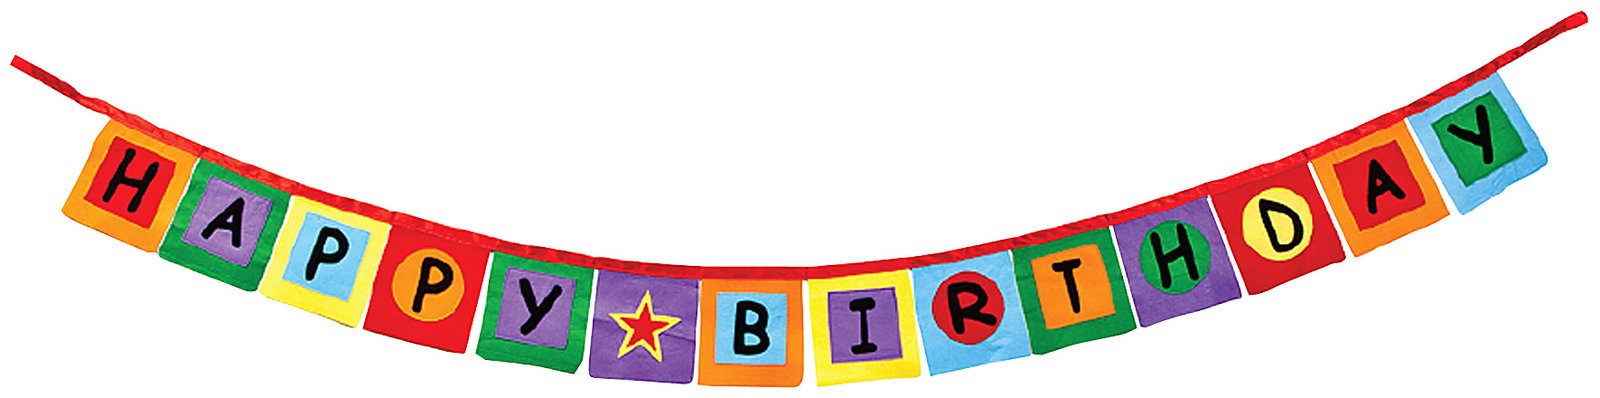 Happy birthday banner clip art free clipart images 2